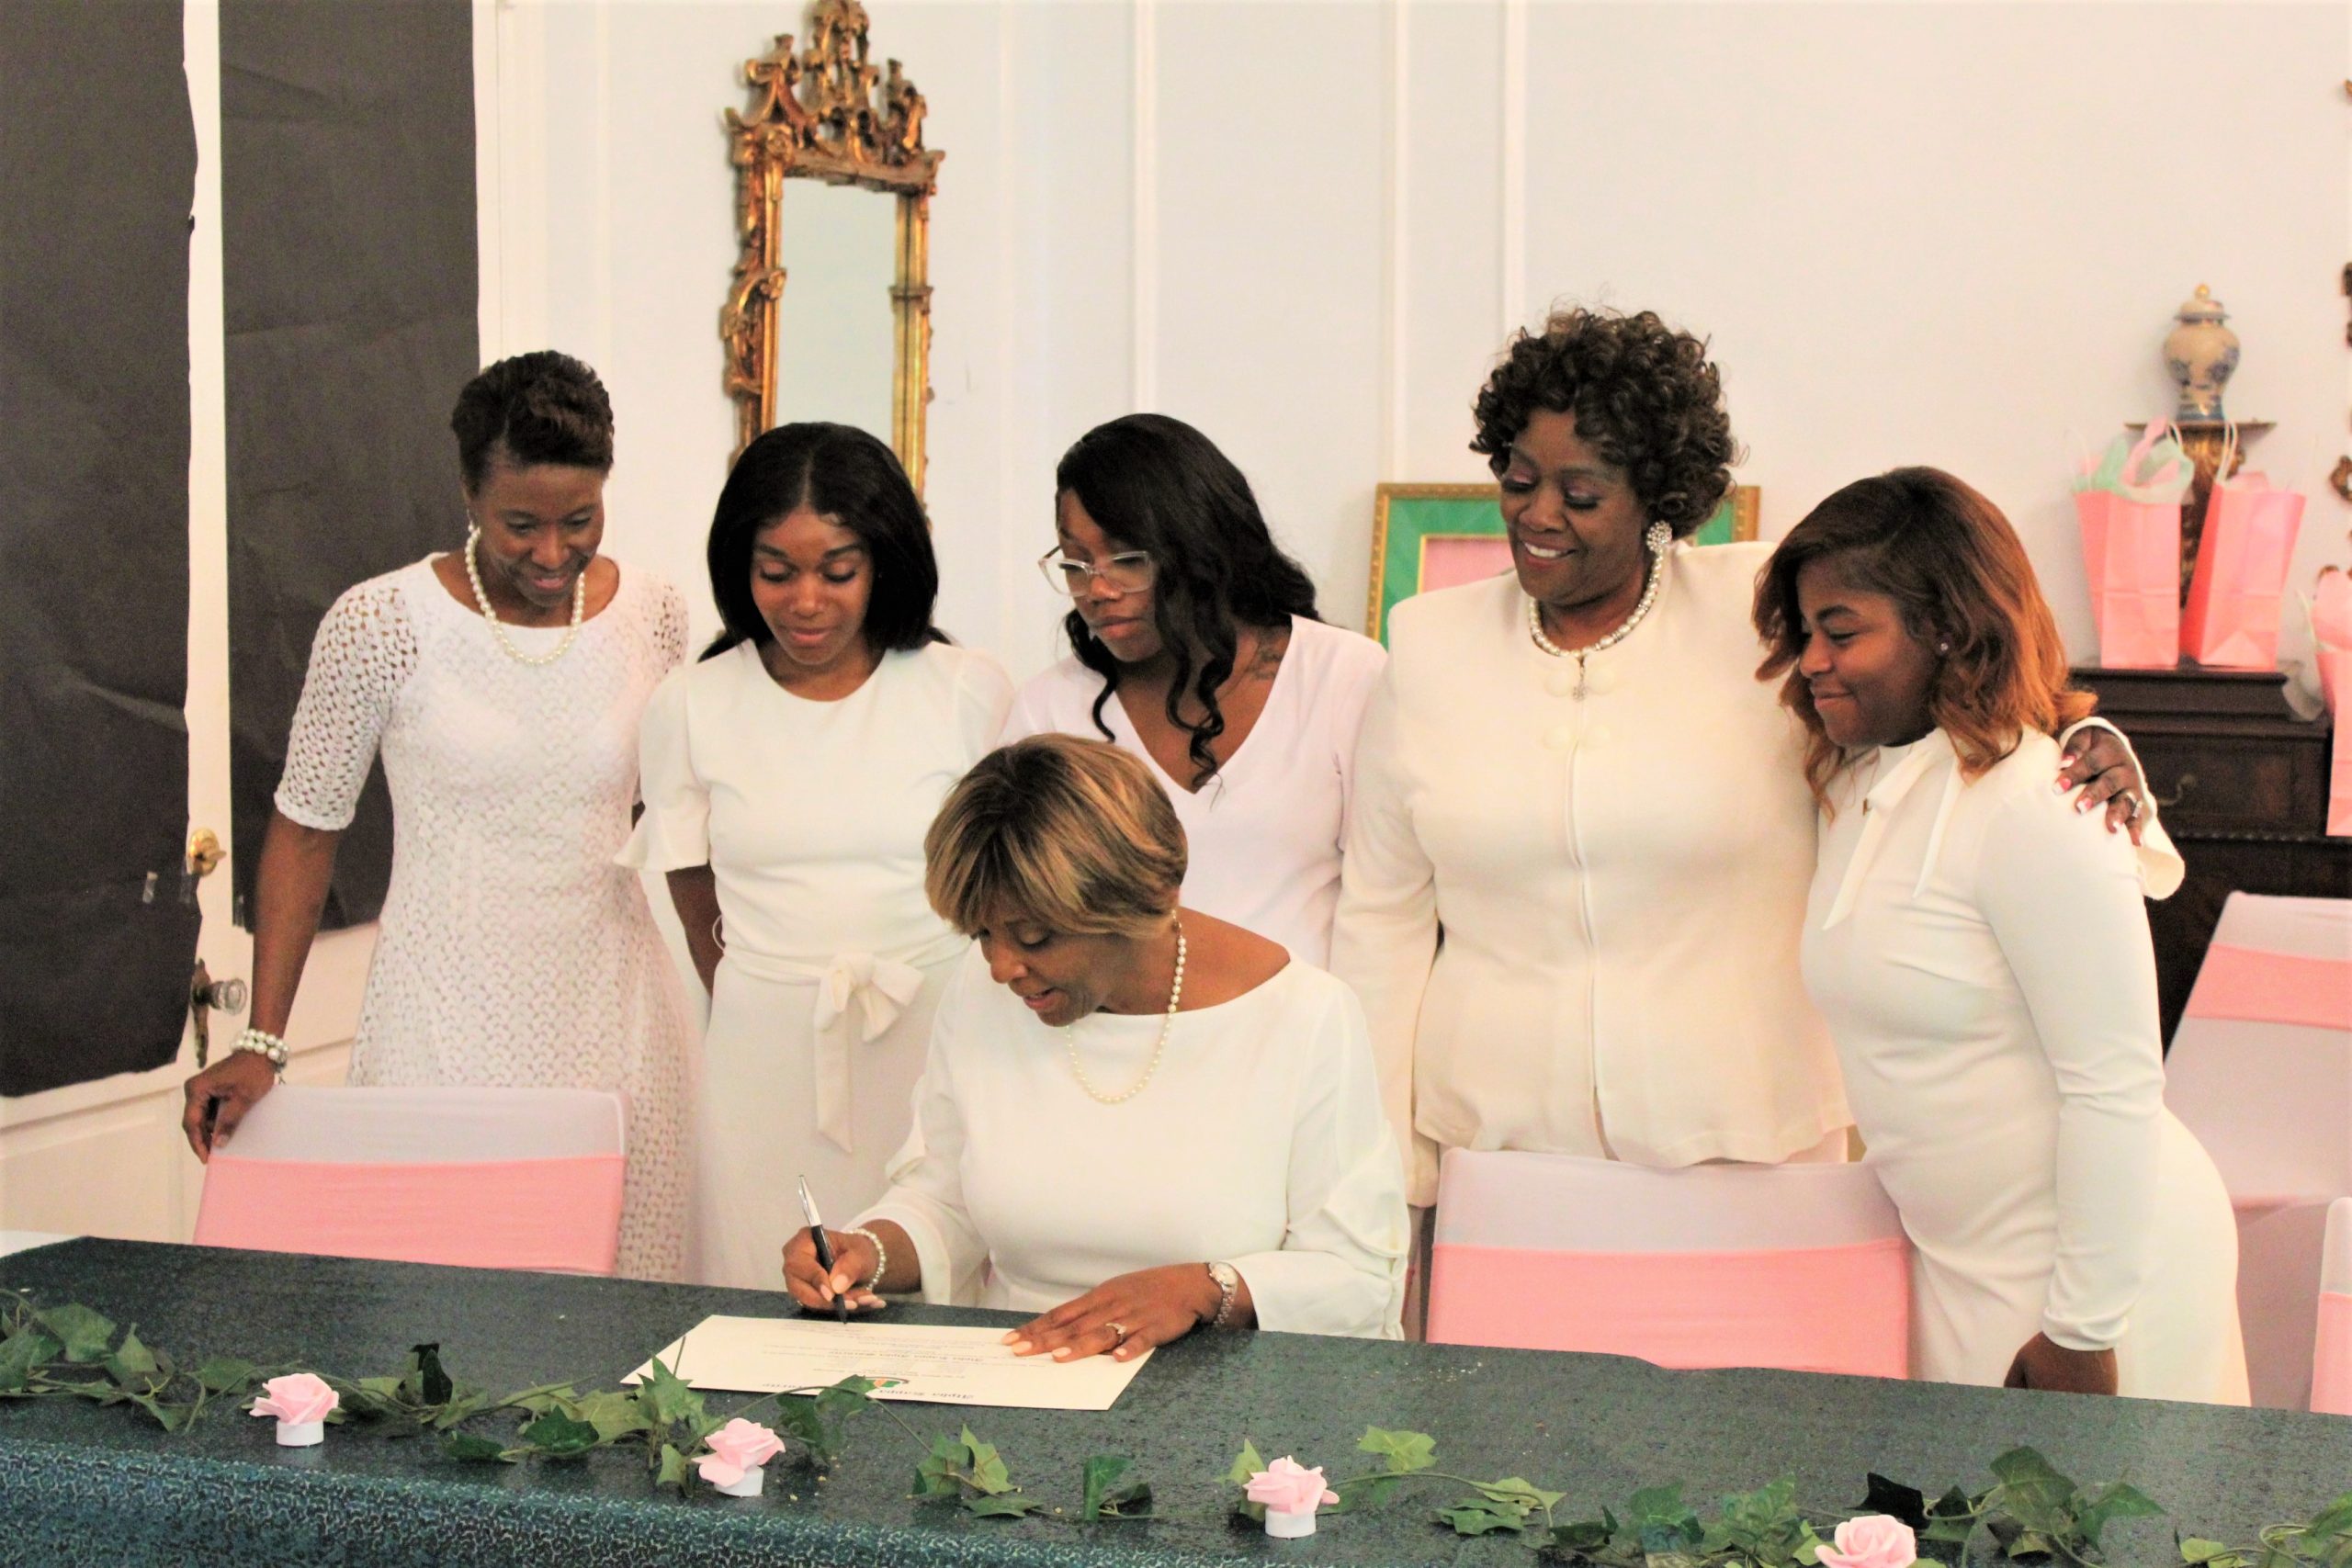 The Upsilon Nu Chapter of Alpha Kappa Alpha Sorority, Inc. held a chartering ceremony and celebration April 24 on the Newberry College campus.